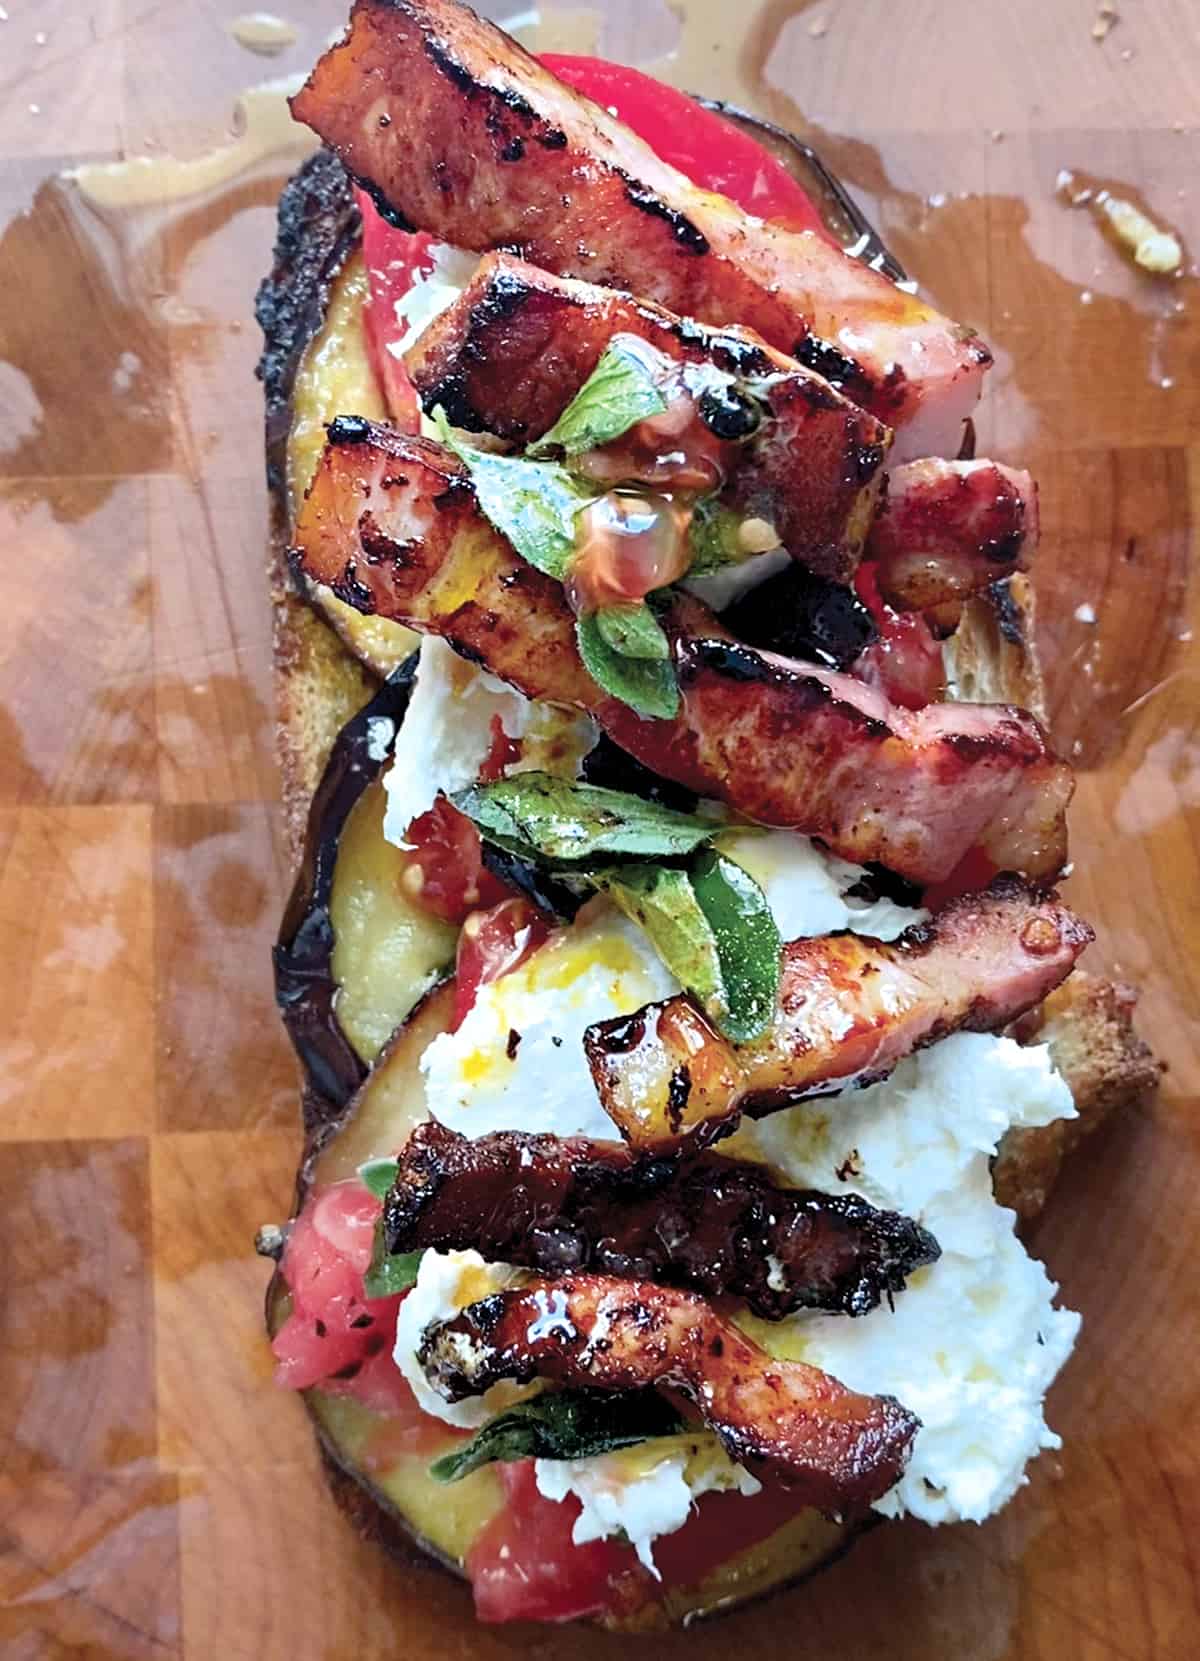 An open-faced tomato eggplant sandwich with pancetta on a wooden surface.